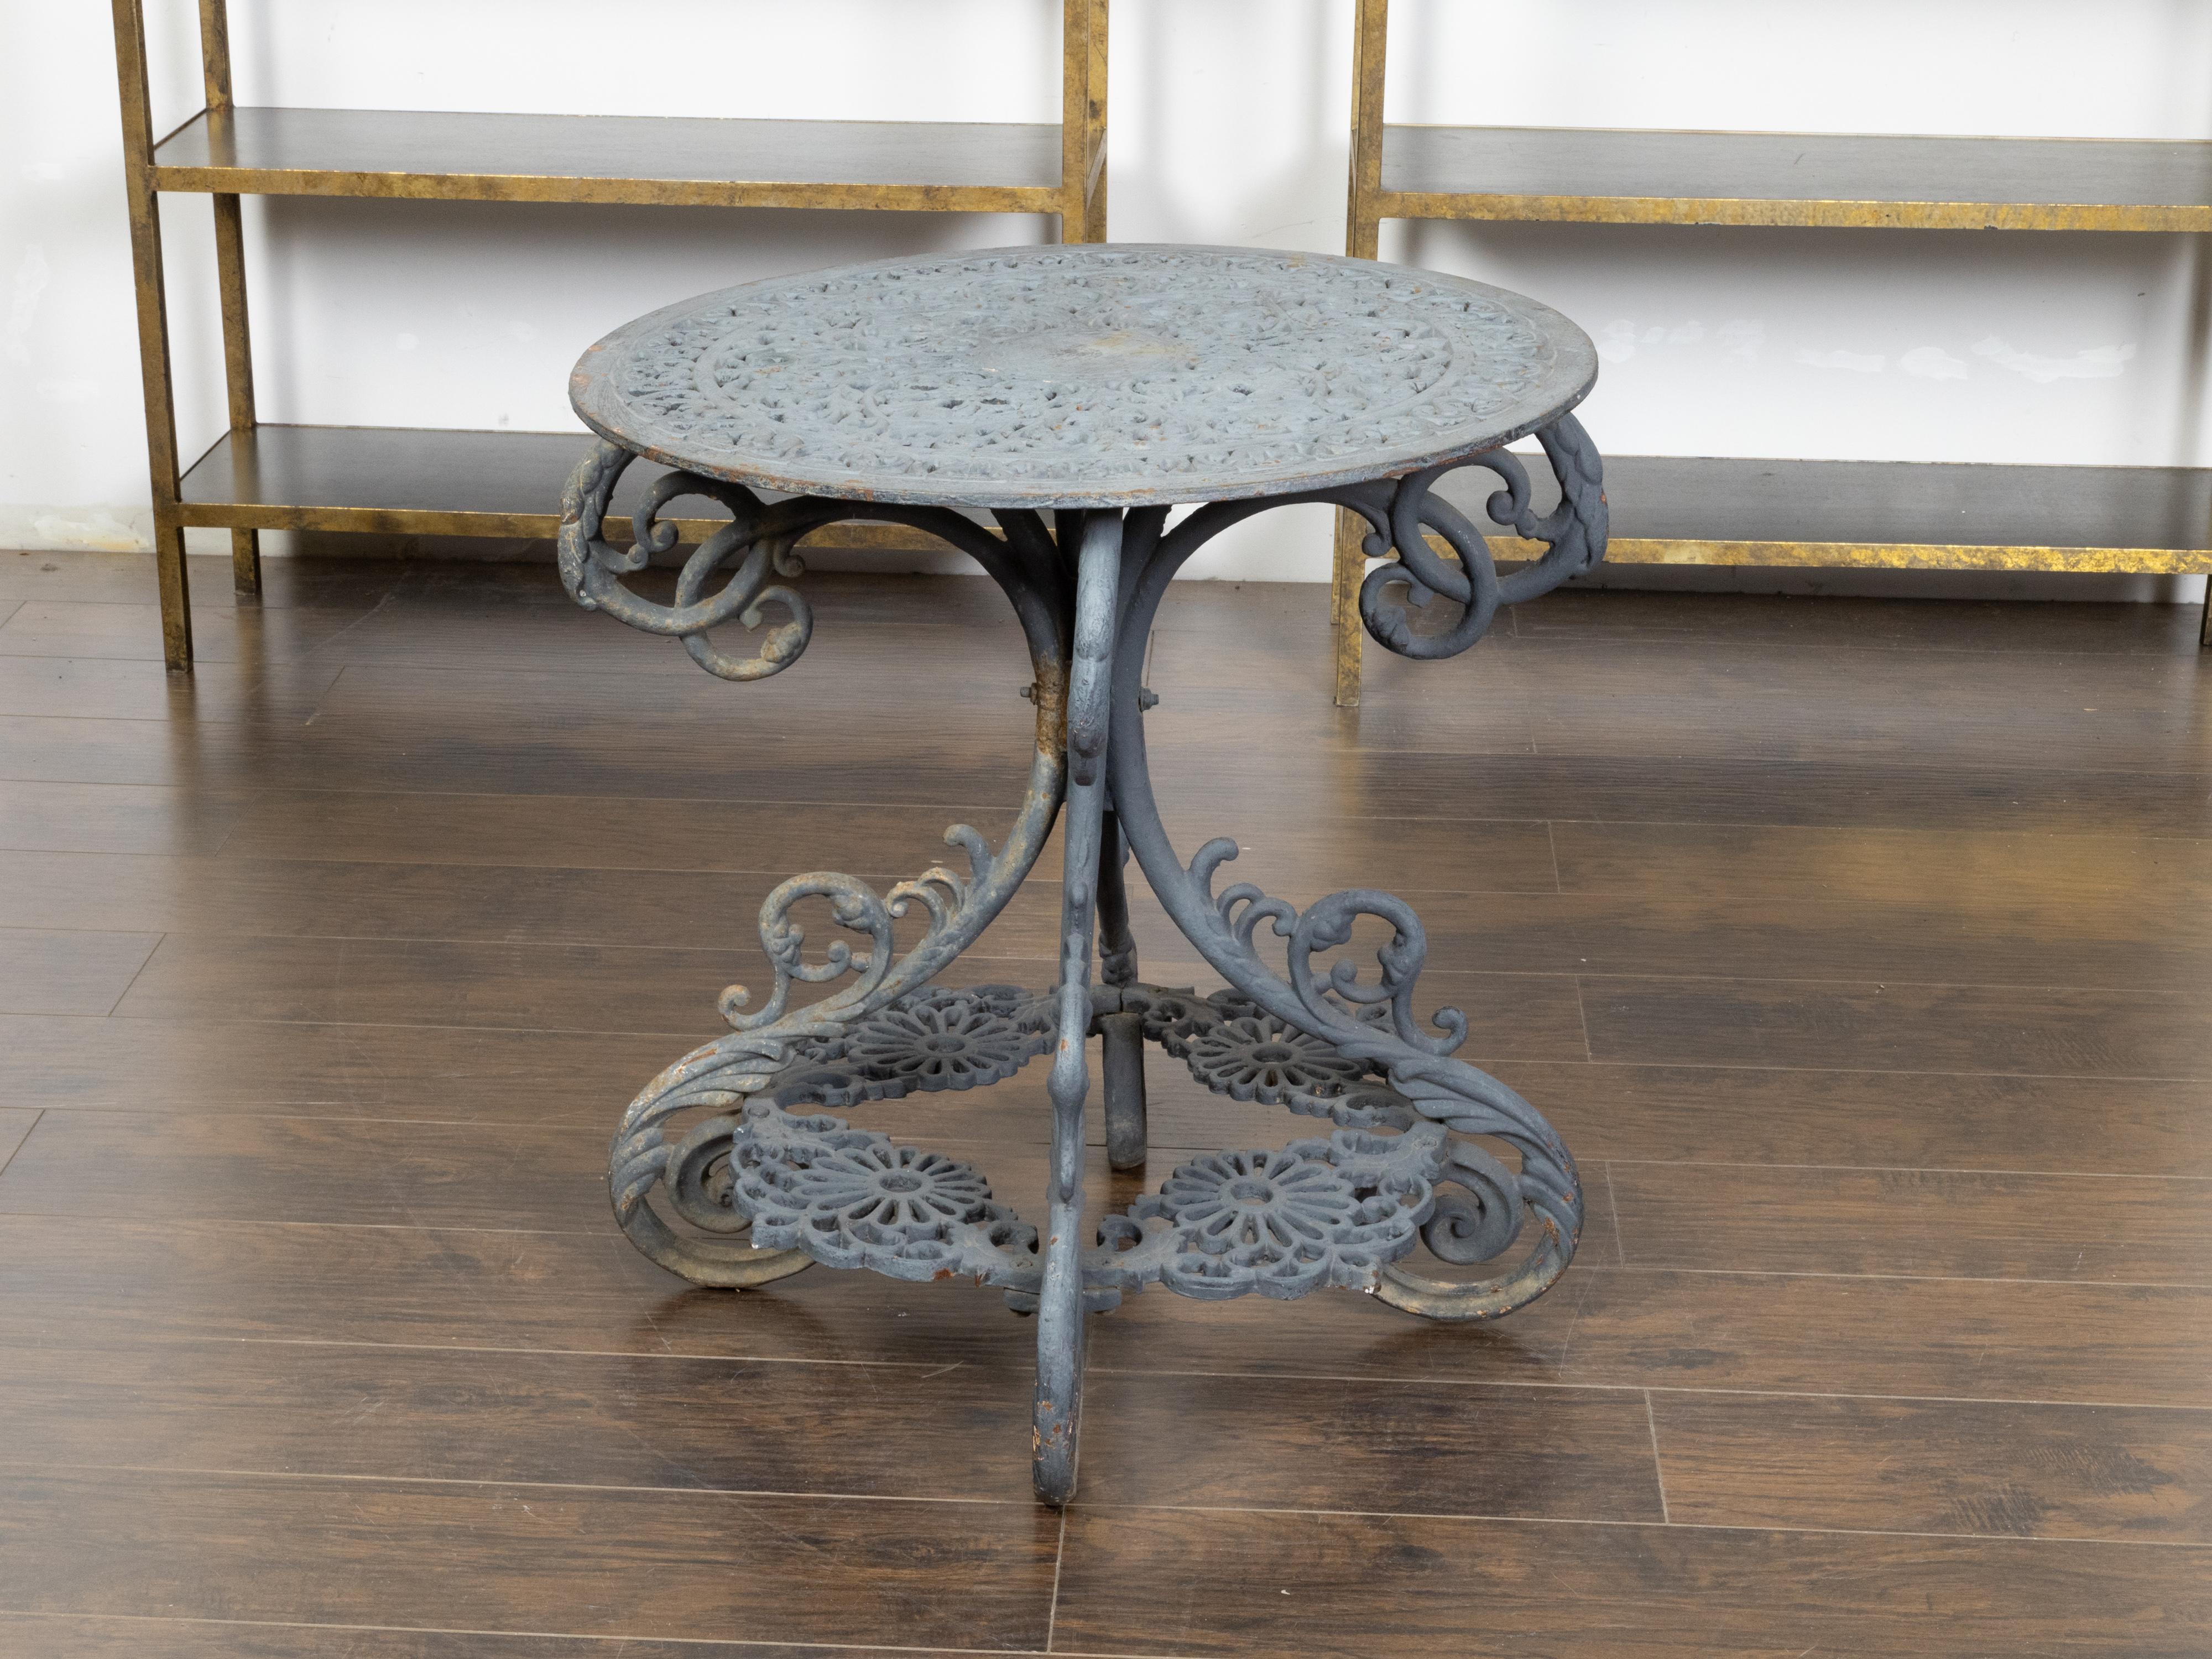 A French grey painted iron garden table from the 19th century, with foliage-themed openwork top, large scrolling legs, acanthus leaves and floral motifs. Created in France during the 19th century, this garden table features a circular top adorned